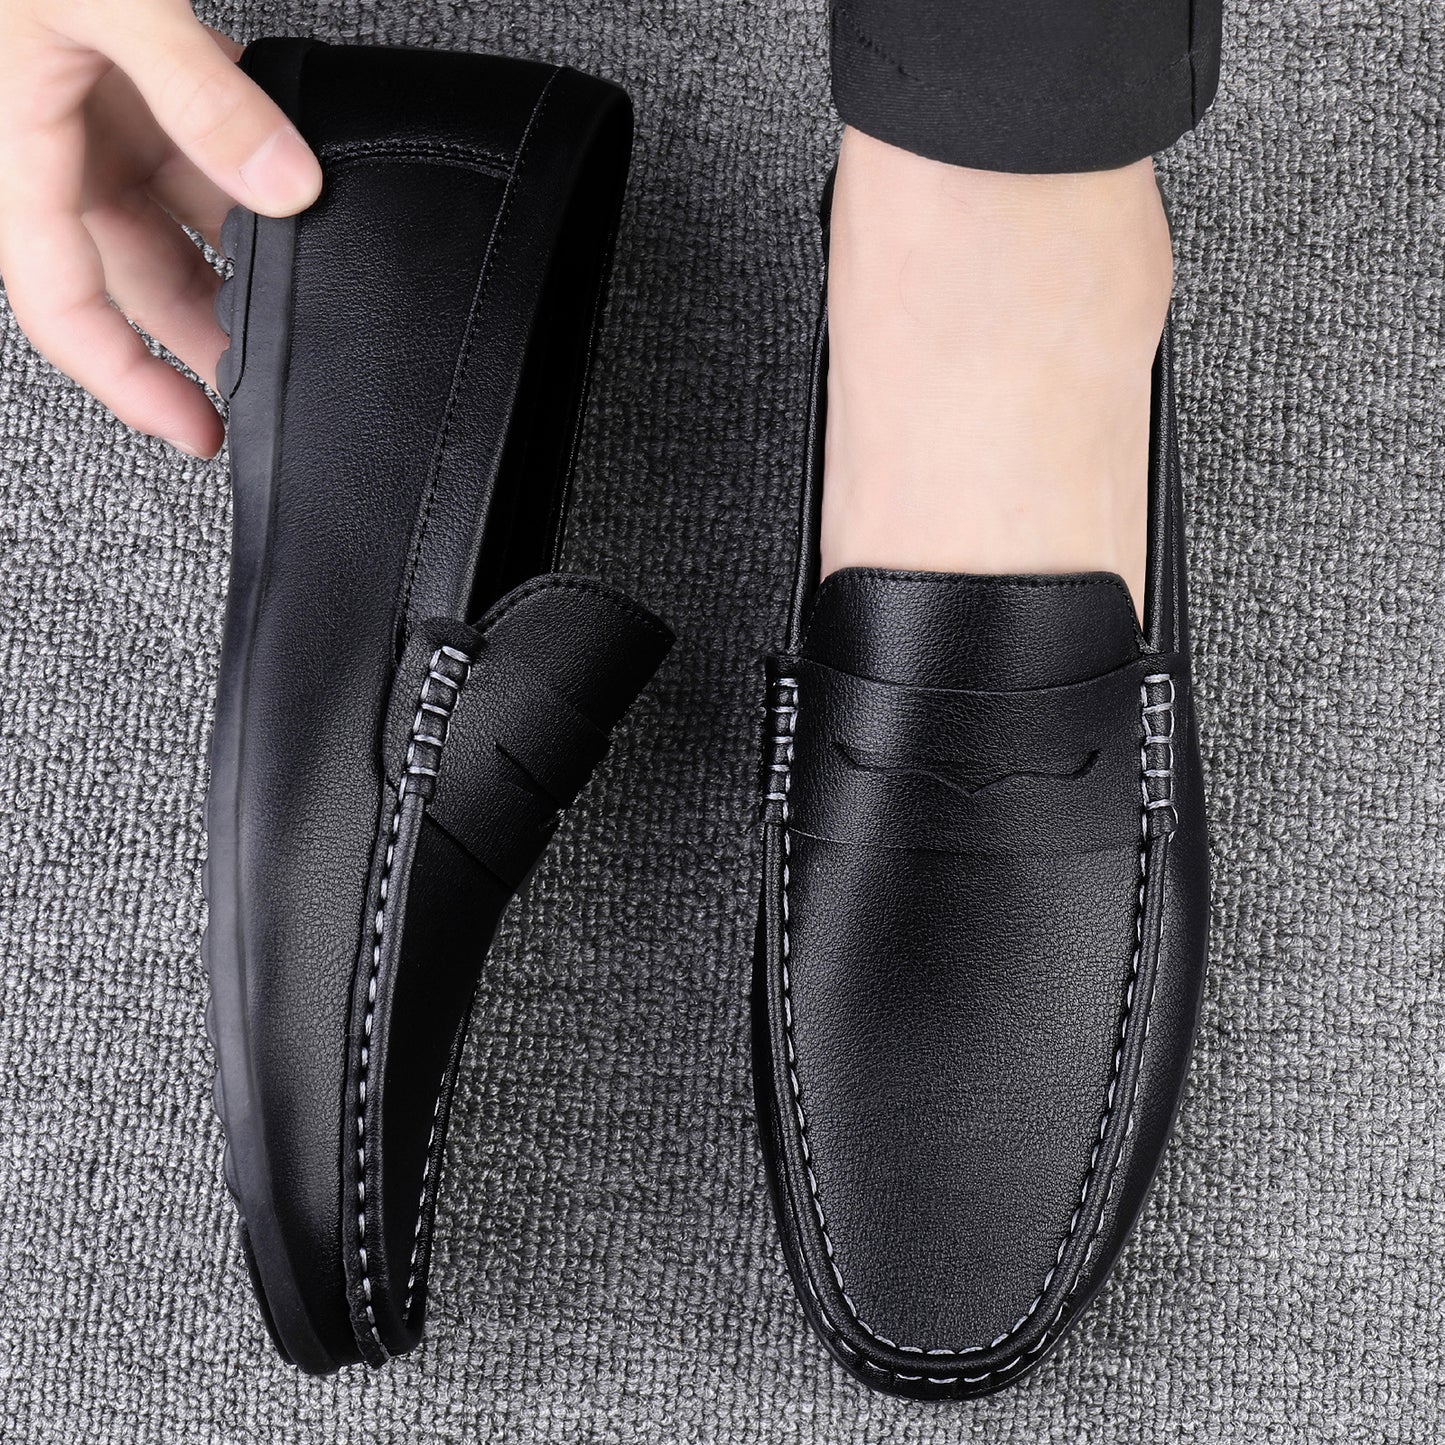 Summer Casual Leather Shoes Driving Flat Fashionable Outdoor Loafers